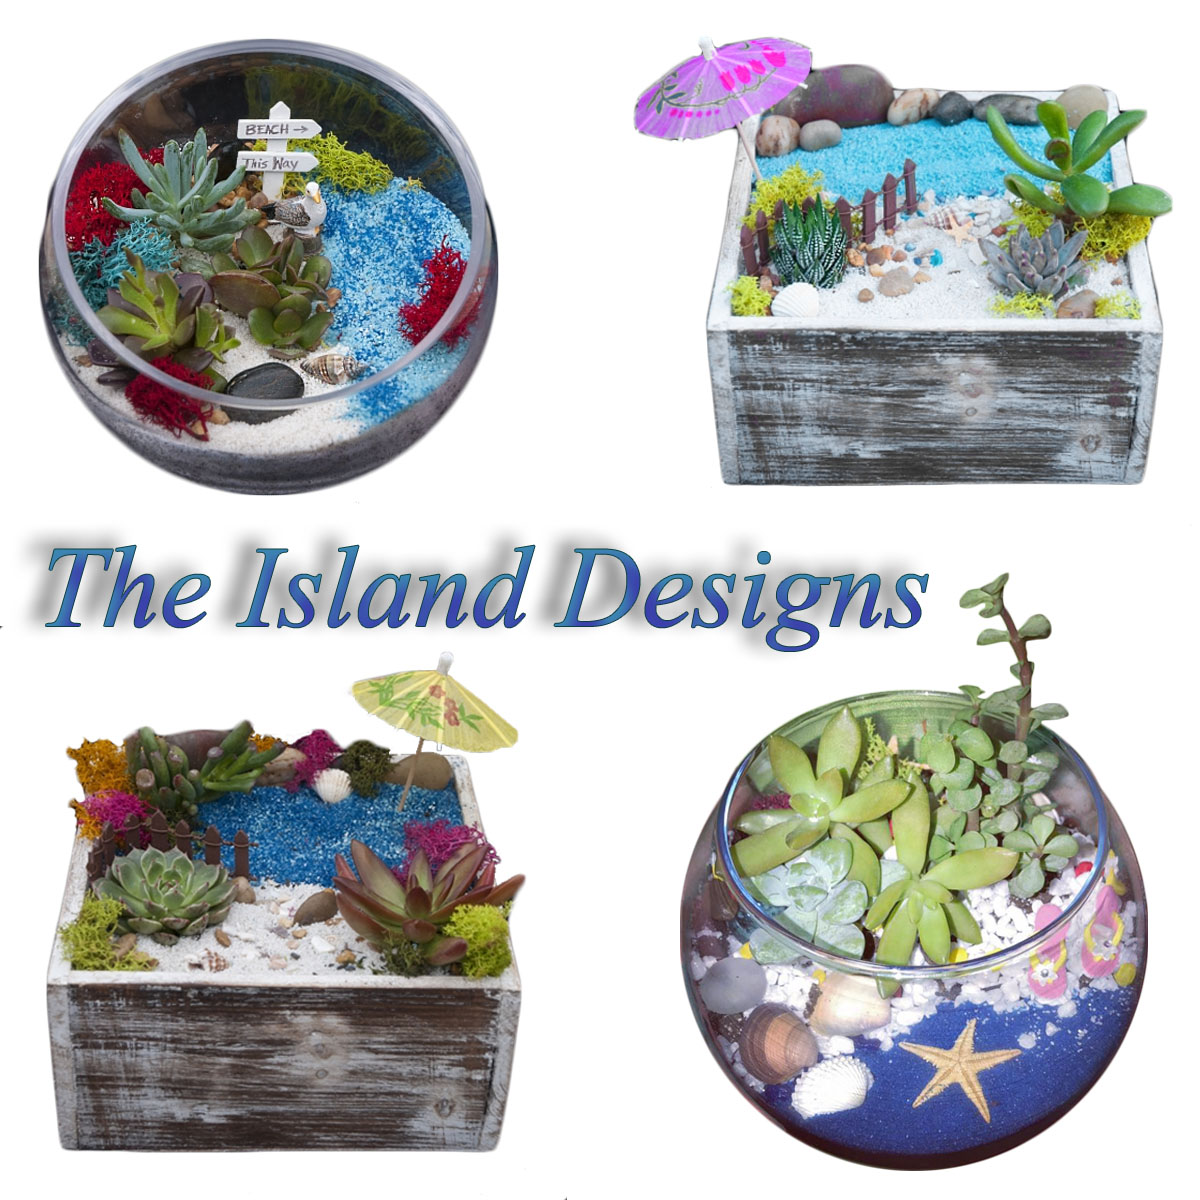 A Island Designs  Your Choice plant nite project by Yaymaker